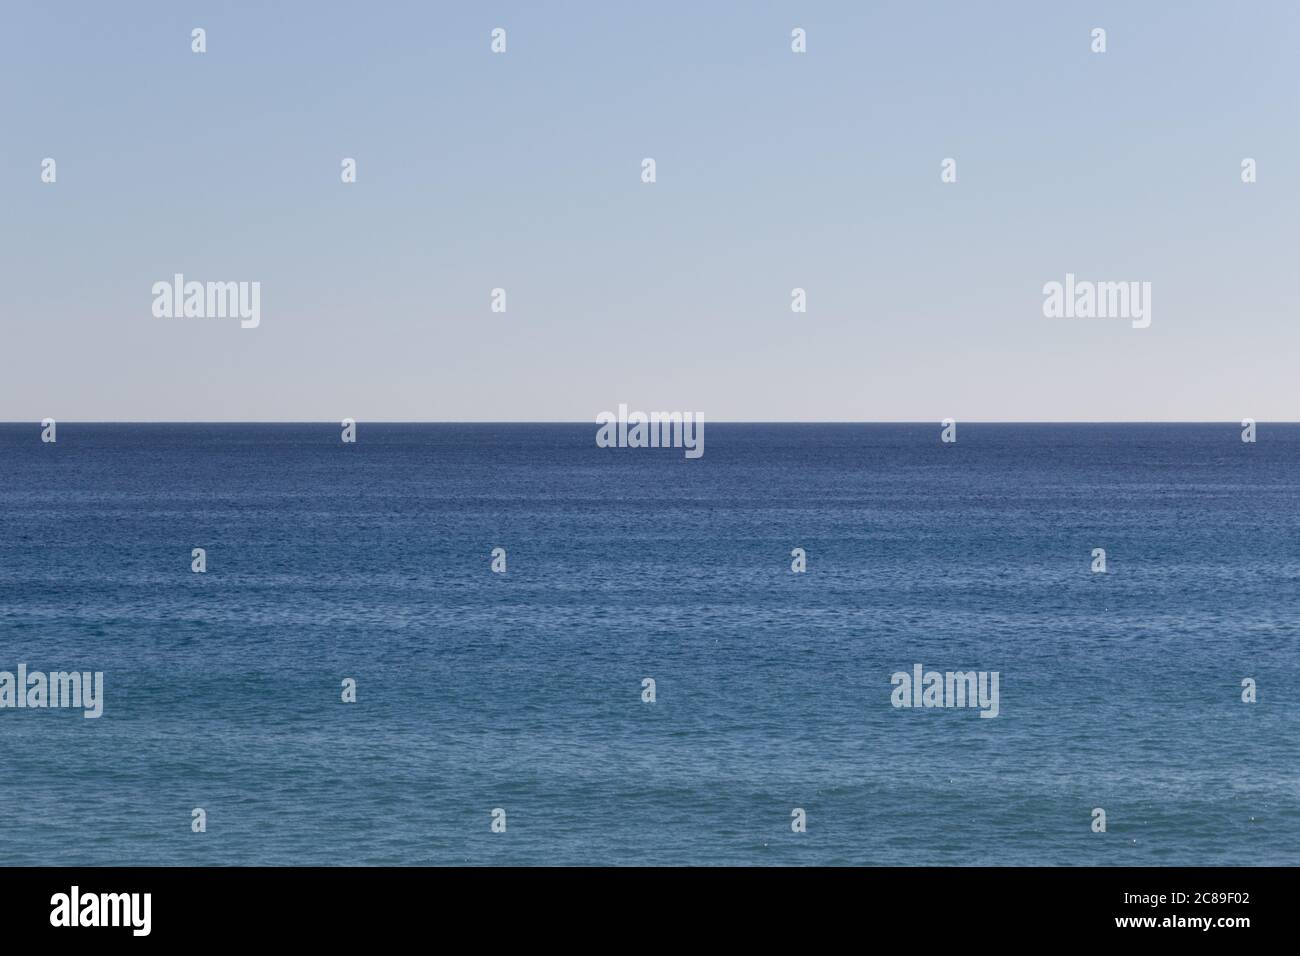 The Tyrrhenian Sea with calm waters, clear sky, horizon over water.  Taken from the island of Ischia off the coast near Naples, Italy. No people. Stock Photo